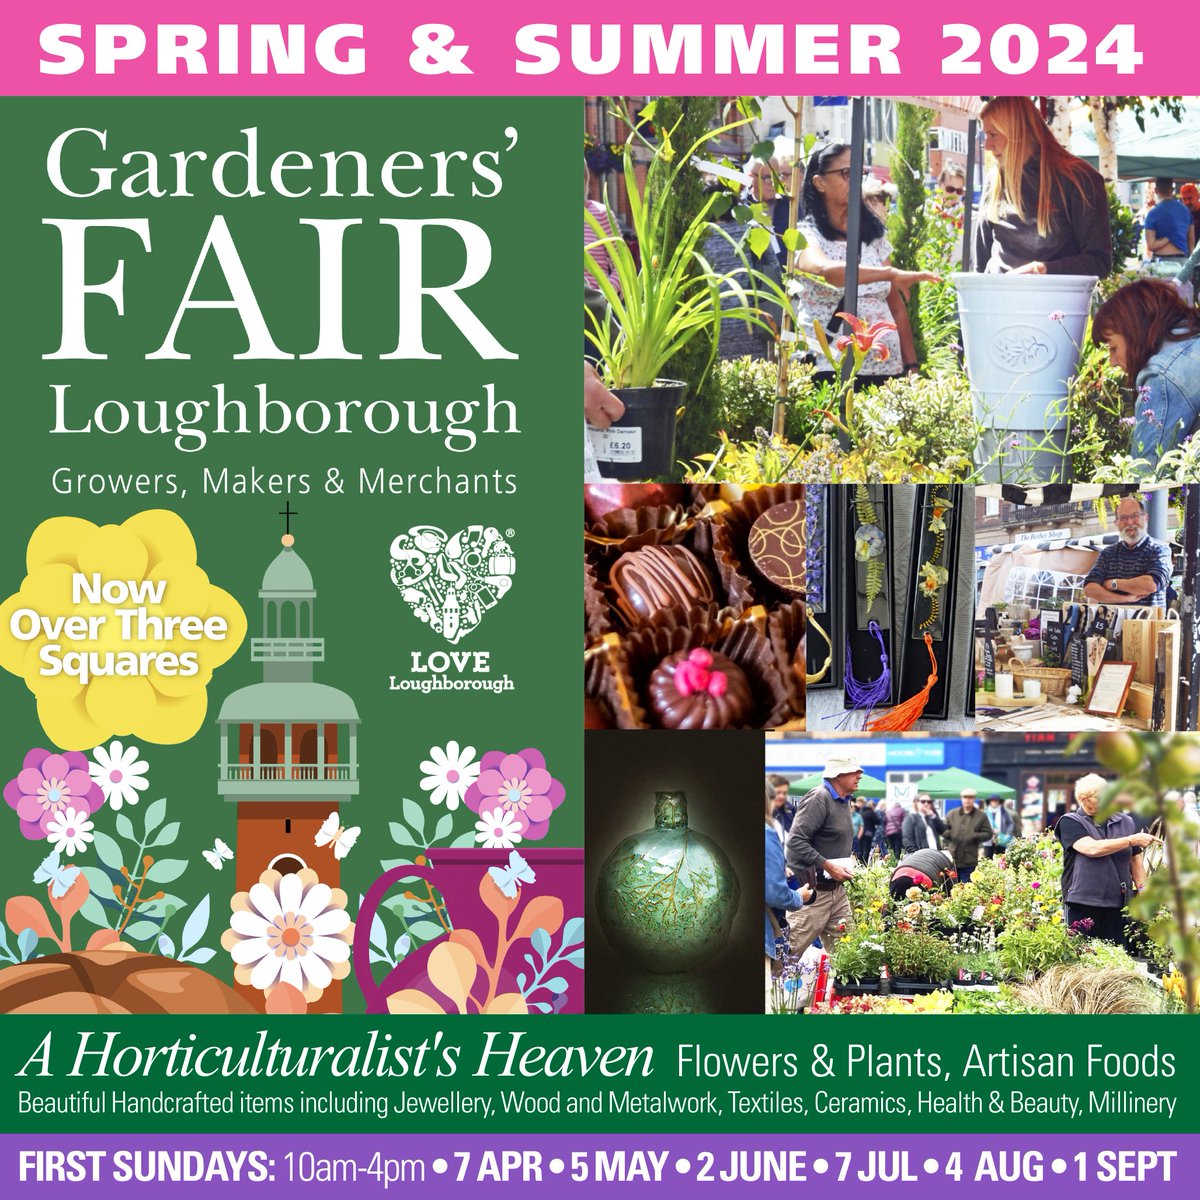 Book your stall at the next Gardeners' Fair taking place in Loughborough, Leicestershire on Sunday 7th April. This popular event attracts visitors from all over the county so bring your plants, flowers and artisan goods to Loughborough. Book here gardenersfair.co.uk